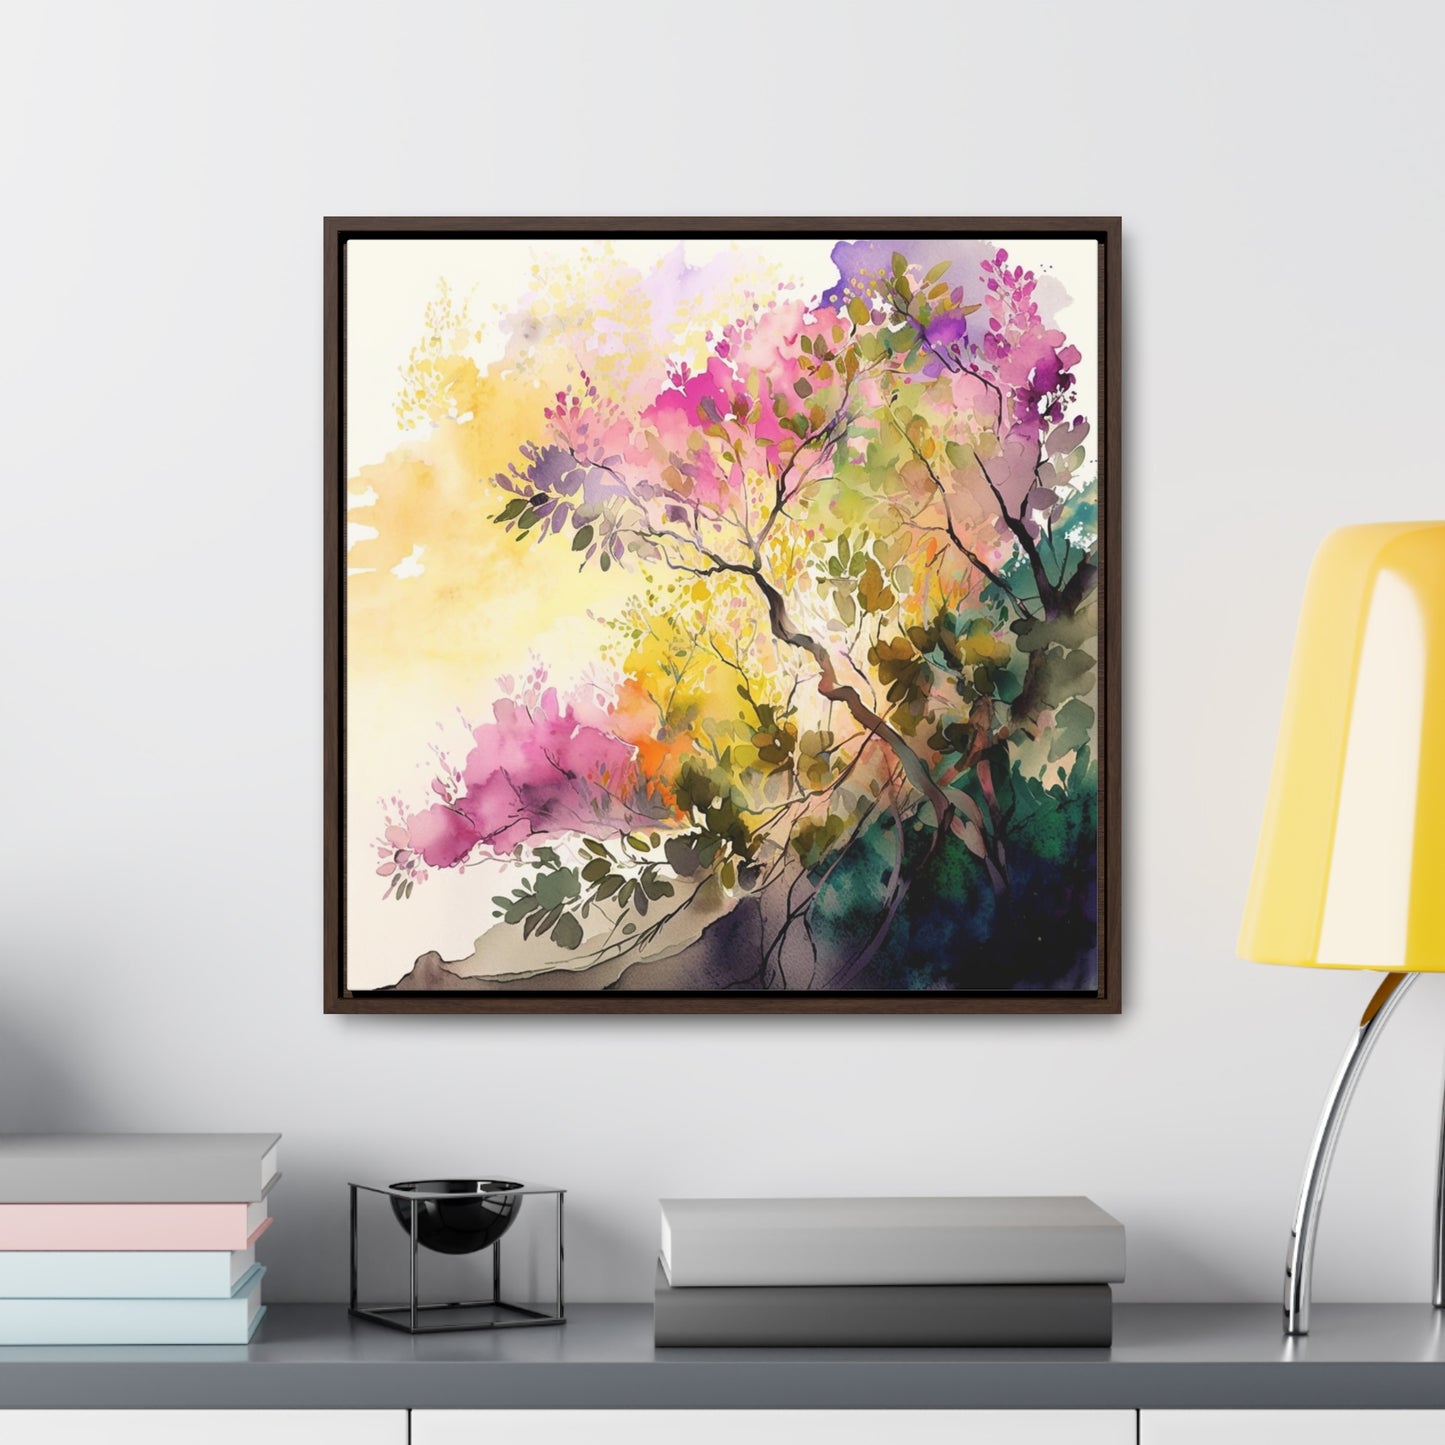 Gallery Canvas Wraps, Square Frame Mother Nature Bright Spring Colors Realistic Watercolor 2